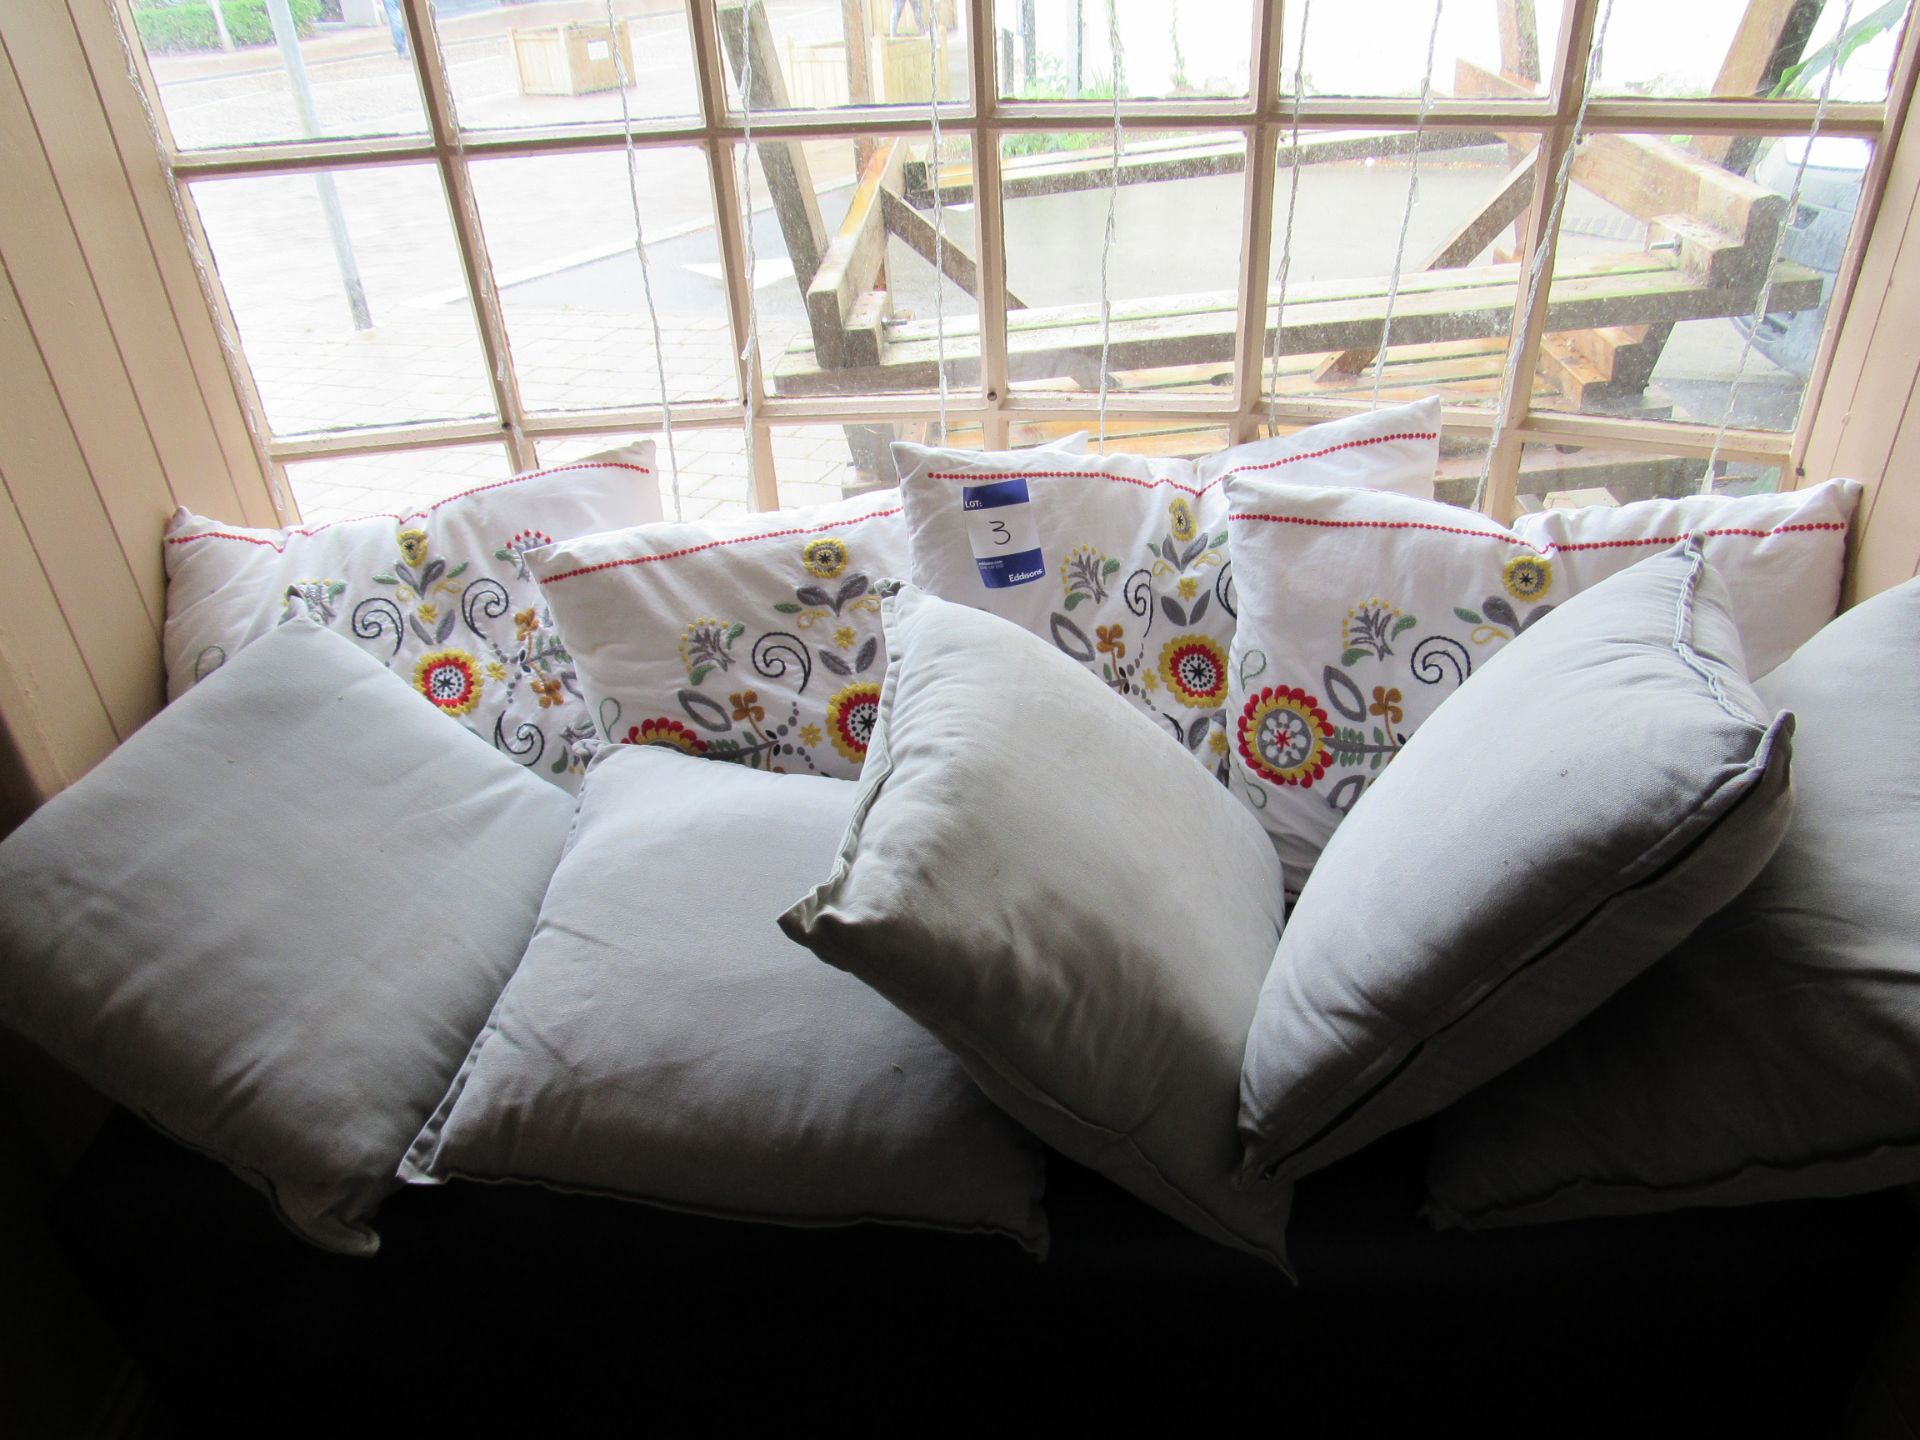 Selection of patterned cushions